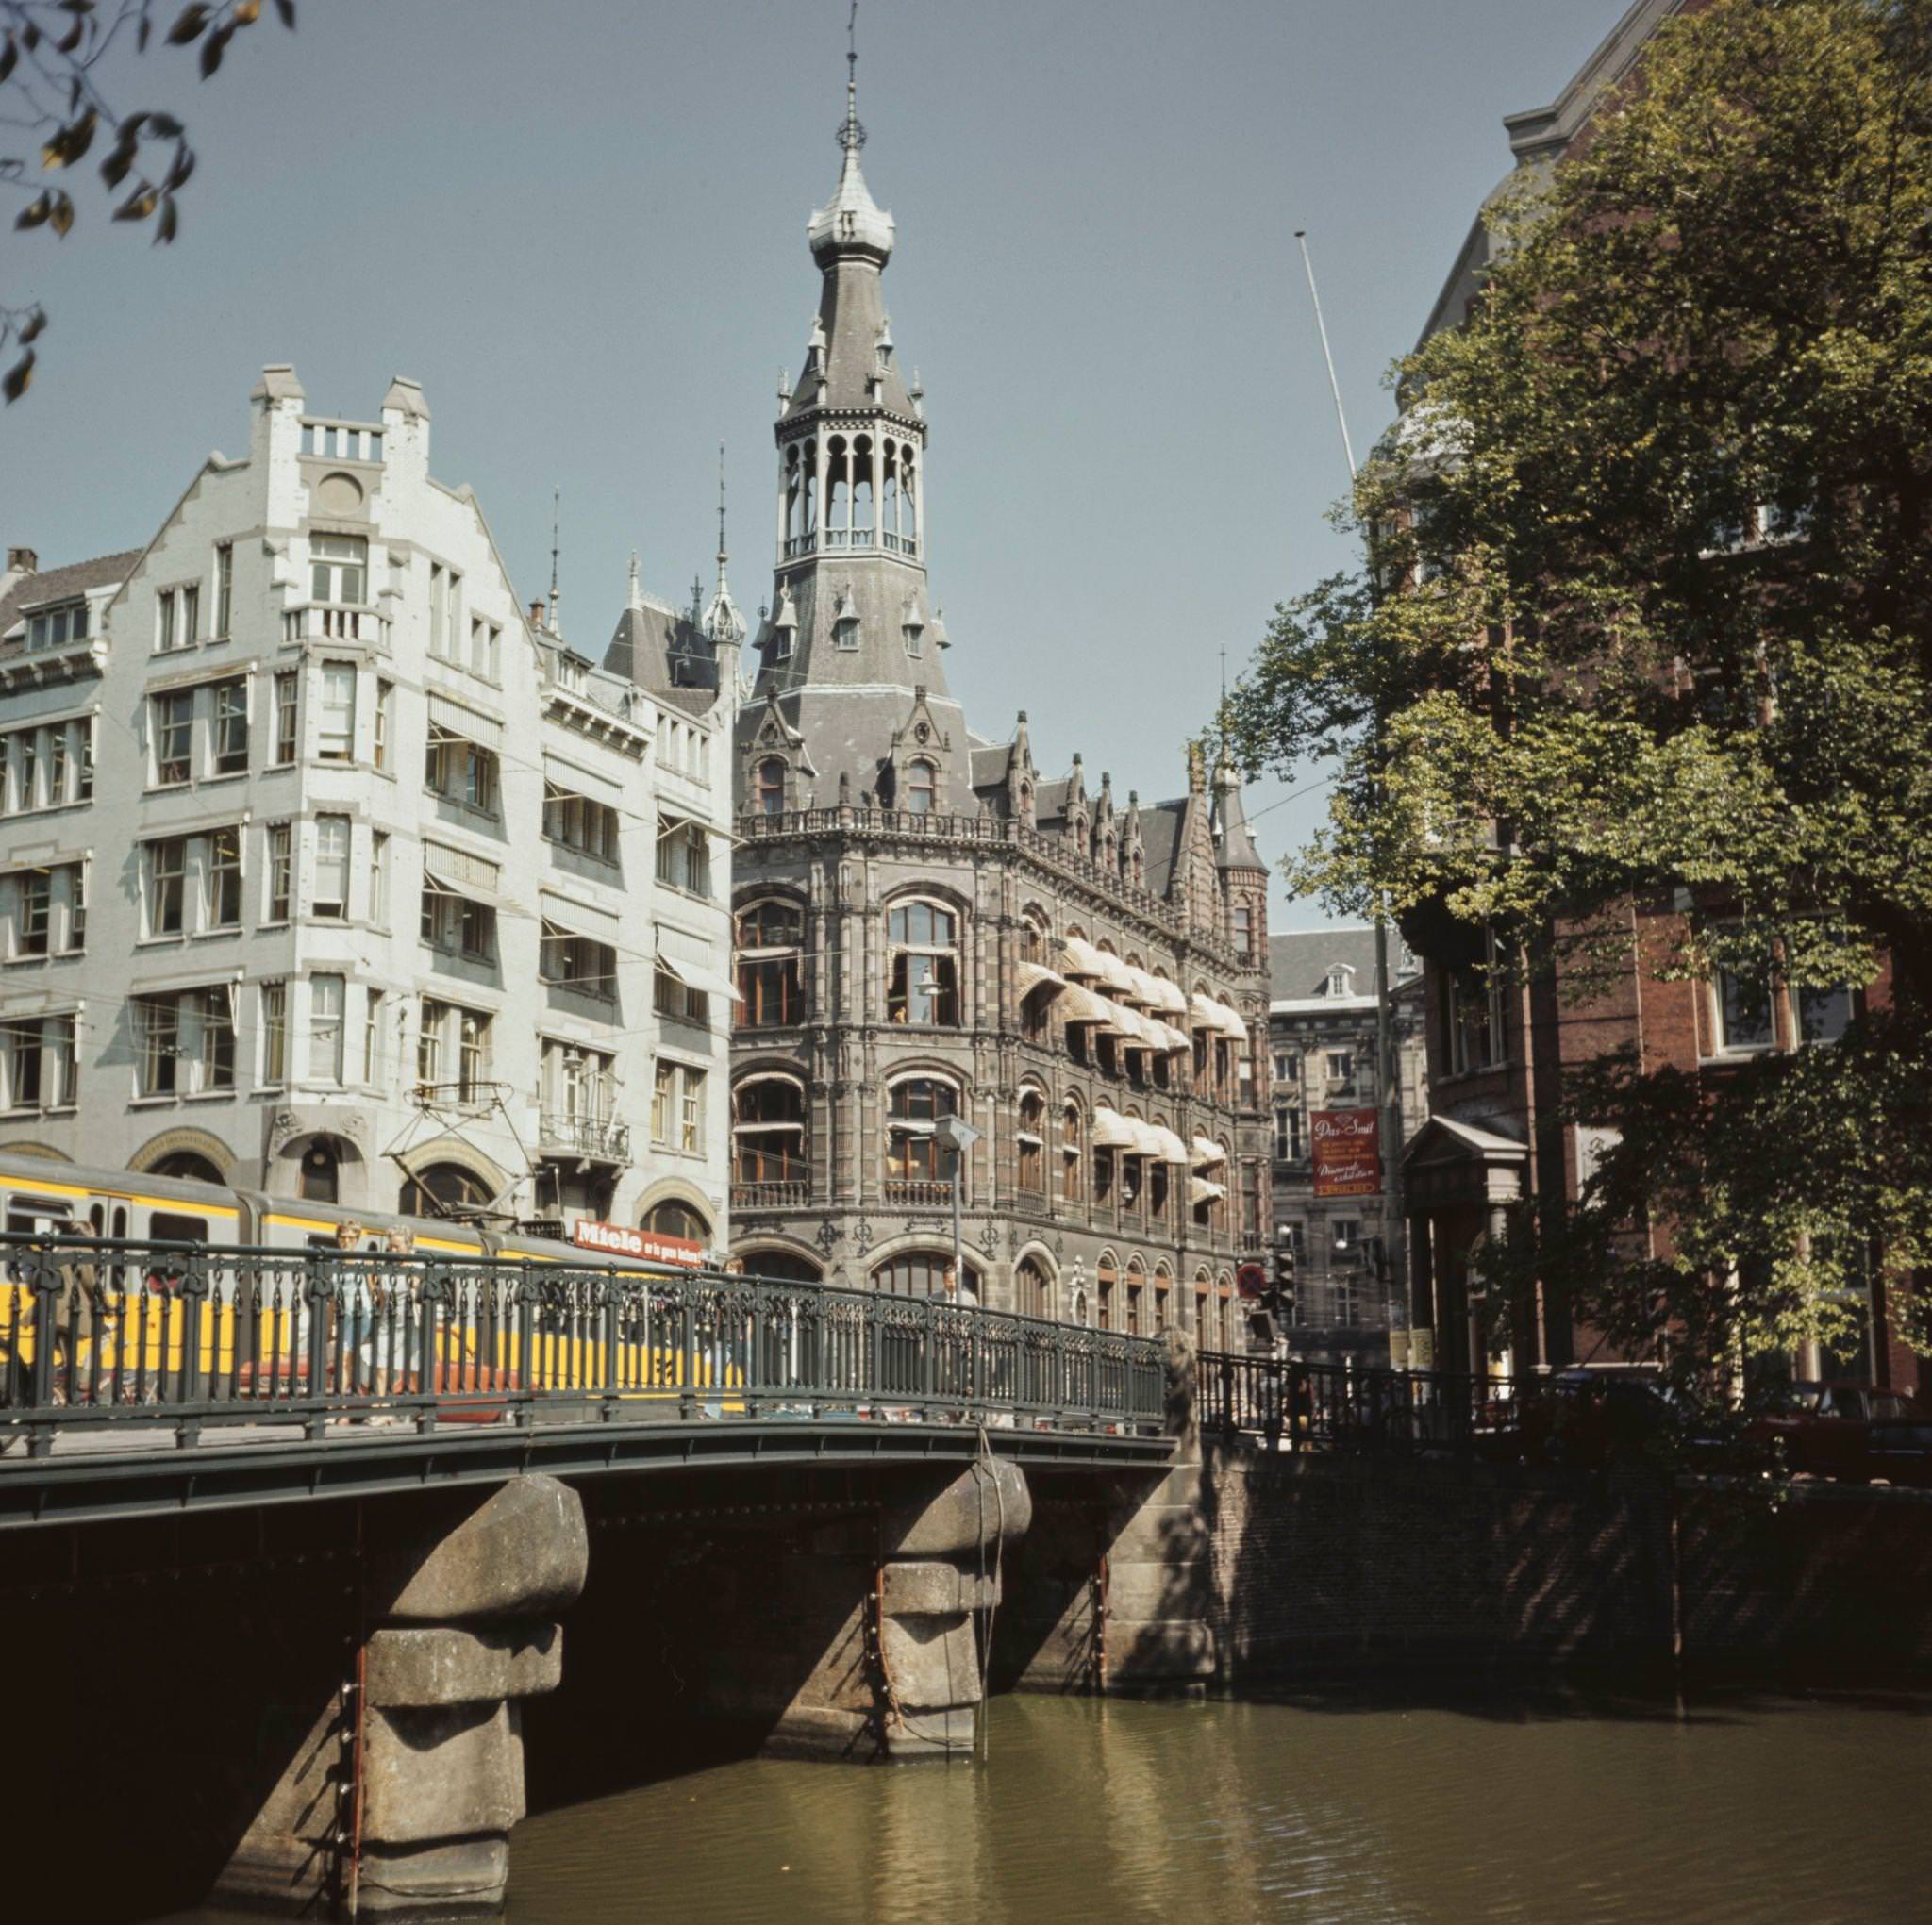 A tram runs along Raadhuisstraat on a bridge over Singel Canal in front of the Central Bank and Old General Post Office in the center of Amsterdam, capital city of the Netherlands, 1970